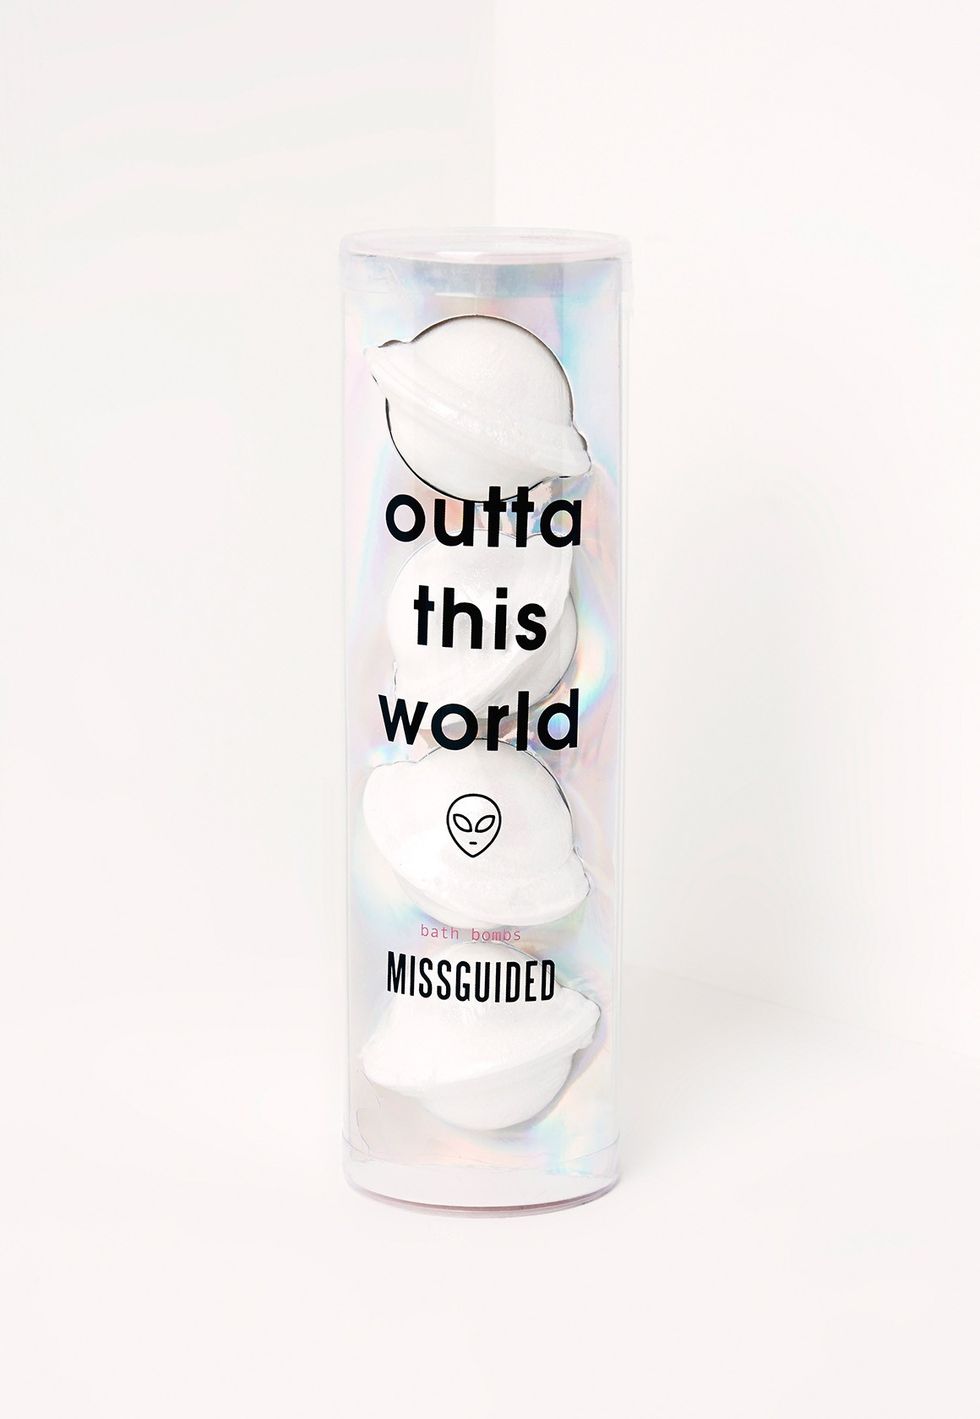 Missguided has launched their own beauty range